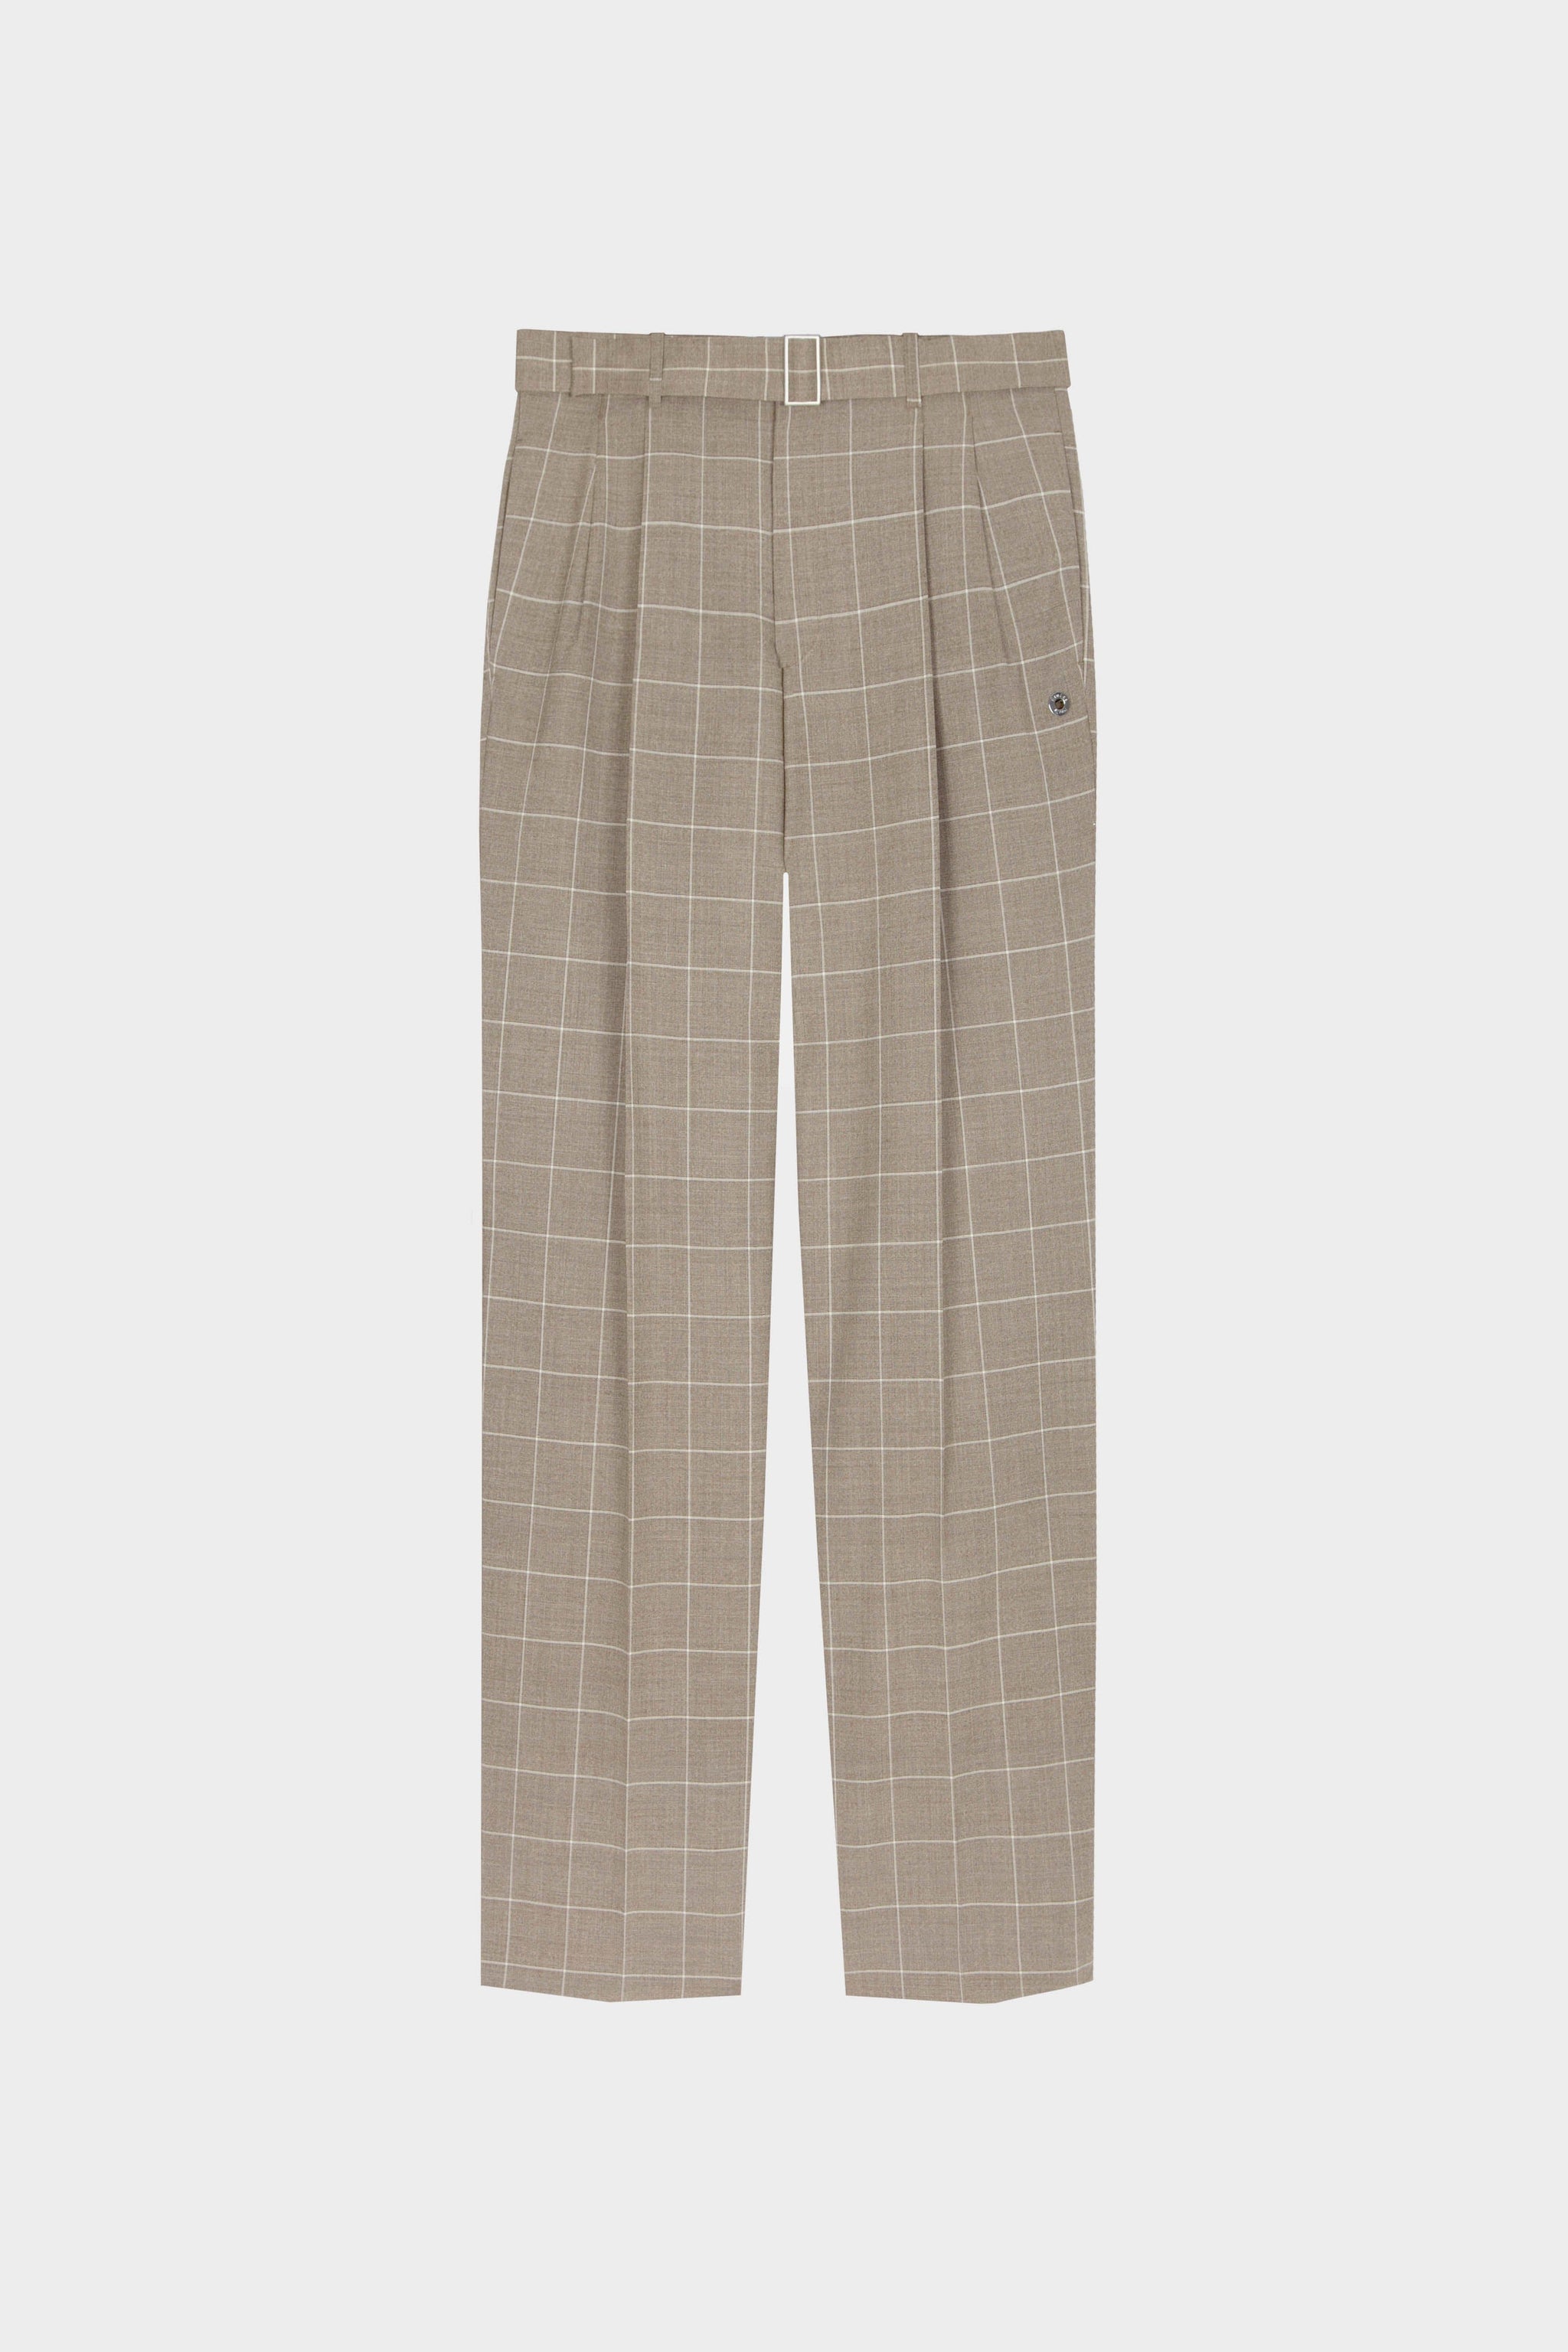 ÉTUDES COOPER WOOL BROWN CHECK TROUSERS 2